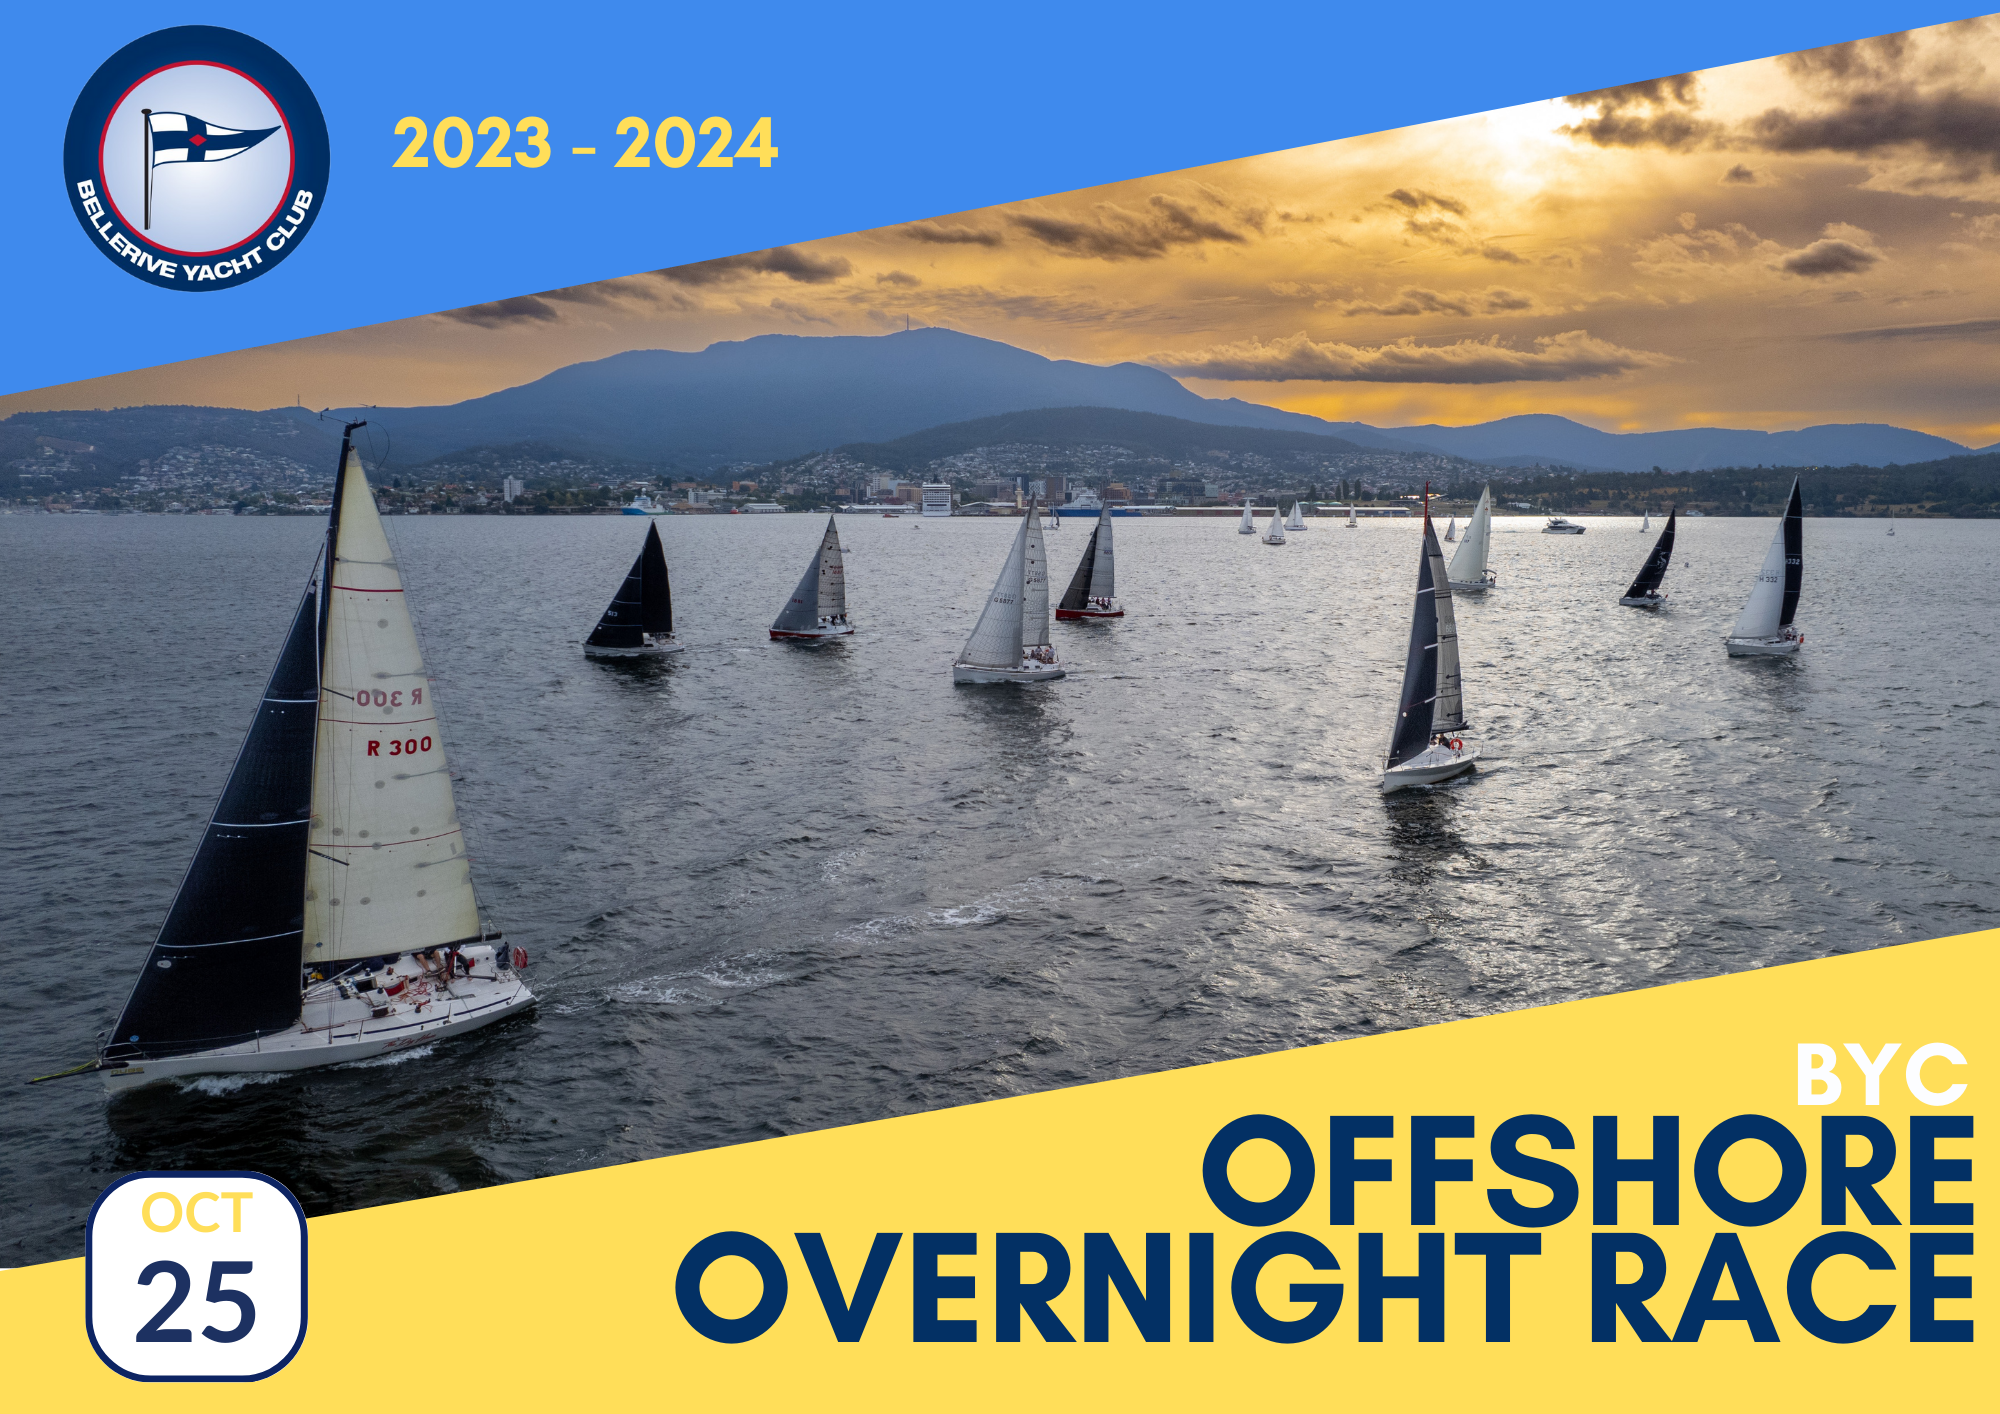 BYC Overnight race poster